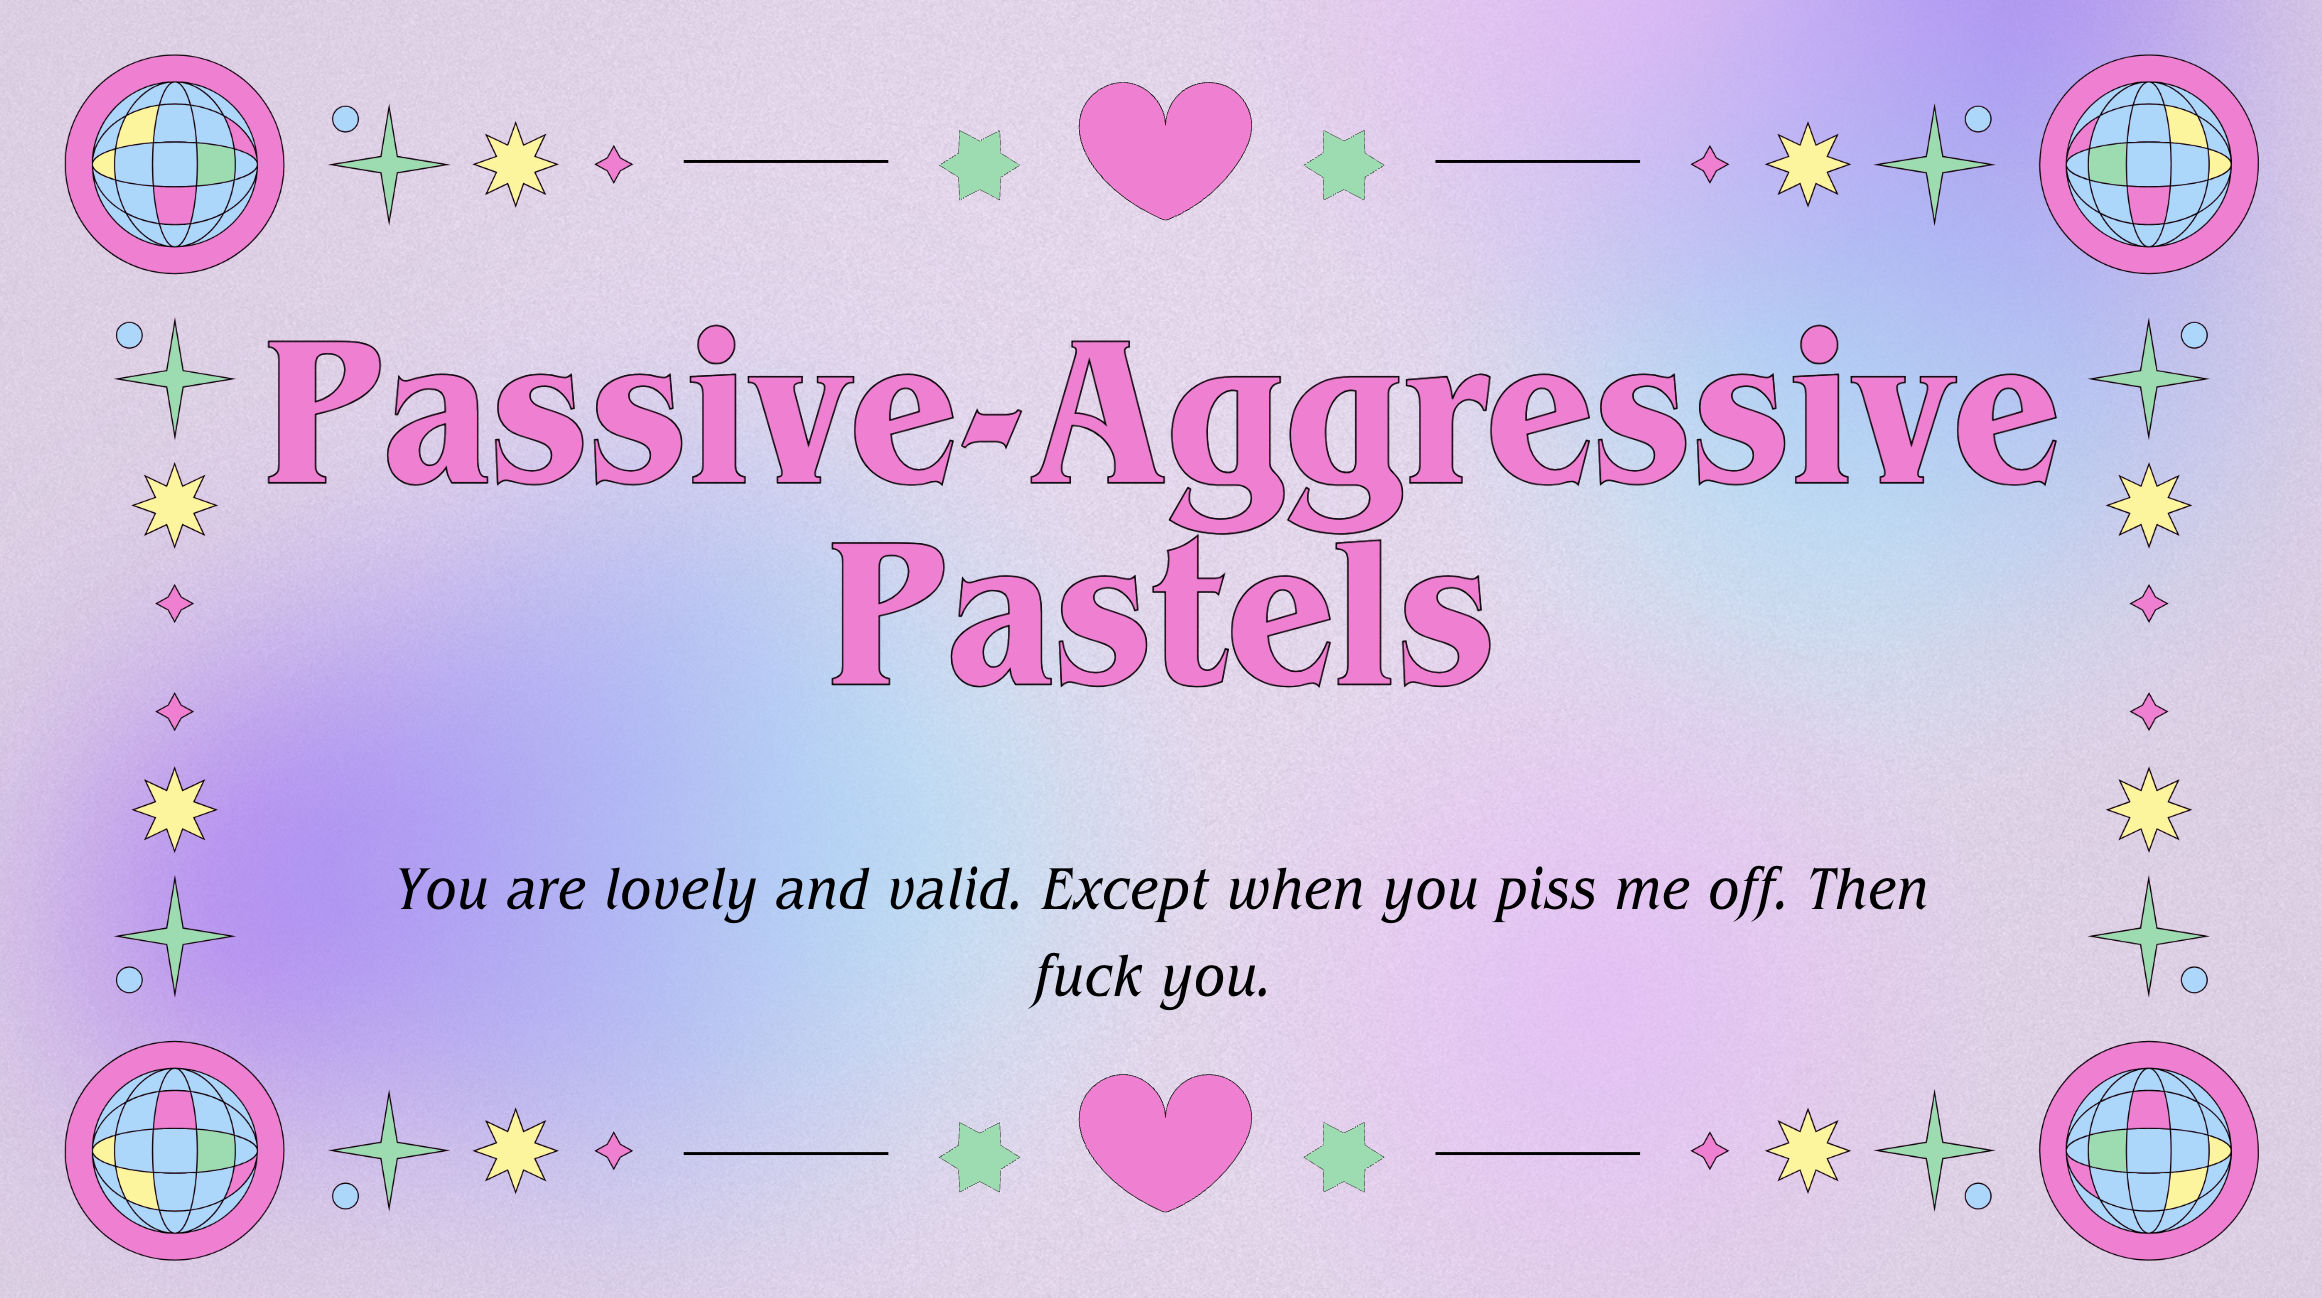 A graphic on a purple/pink/blue gradient background that says 'Passive-Aggressive Pastels: You are lovely and valid. Except when you piss me off. Then fuck you.' There are disco ball, heart and star decorations.